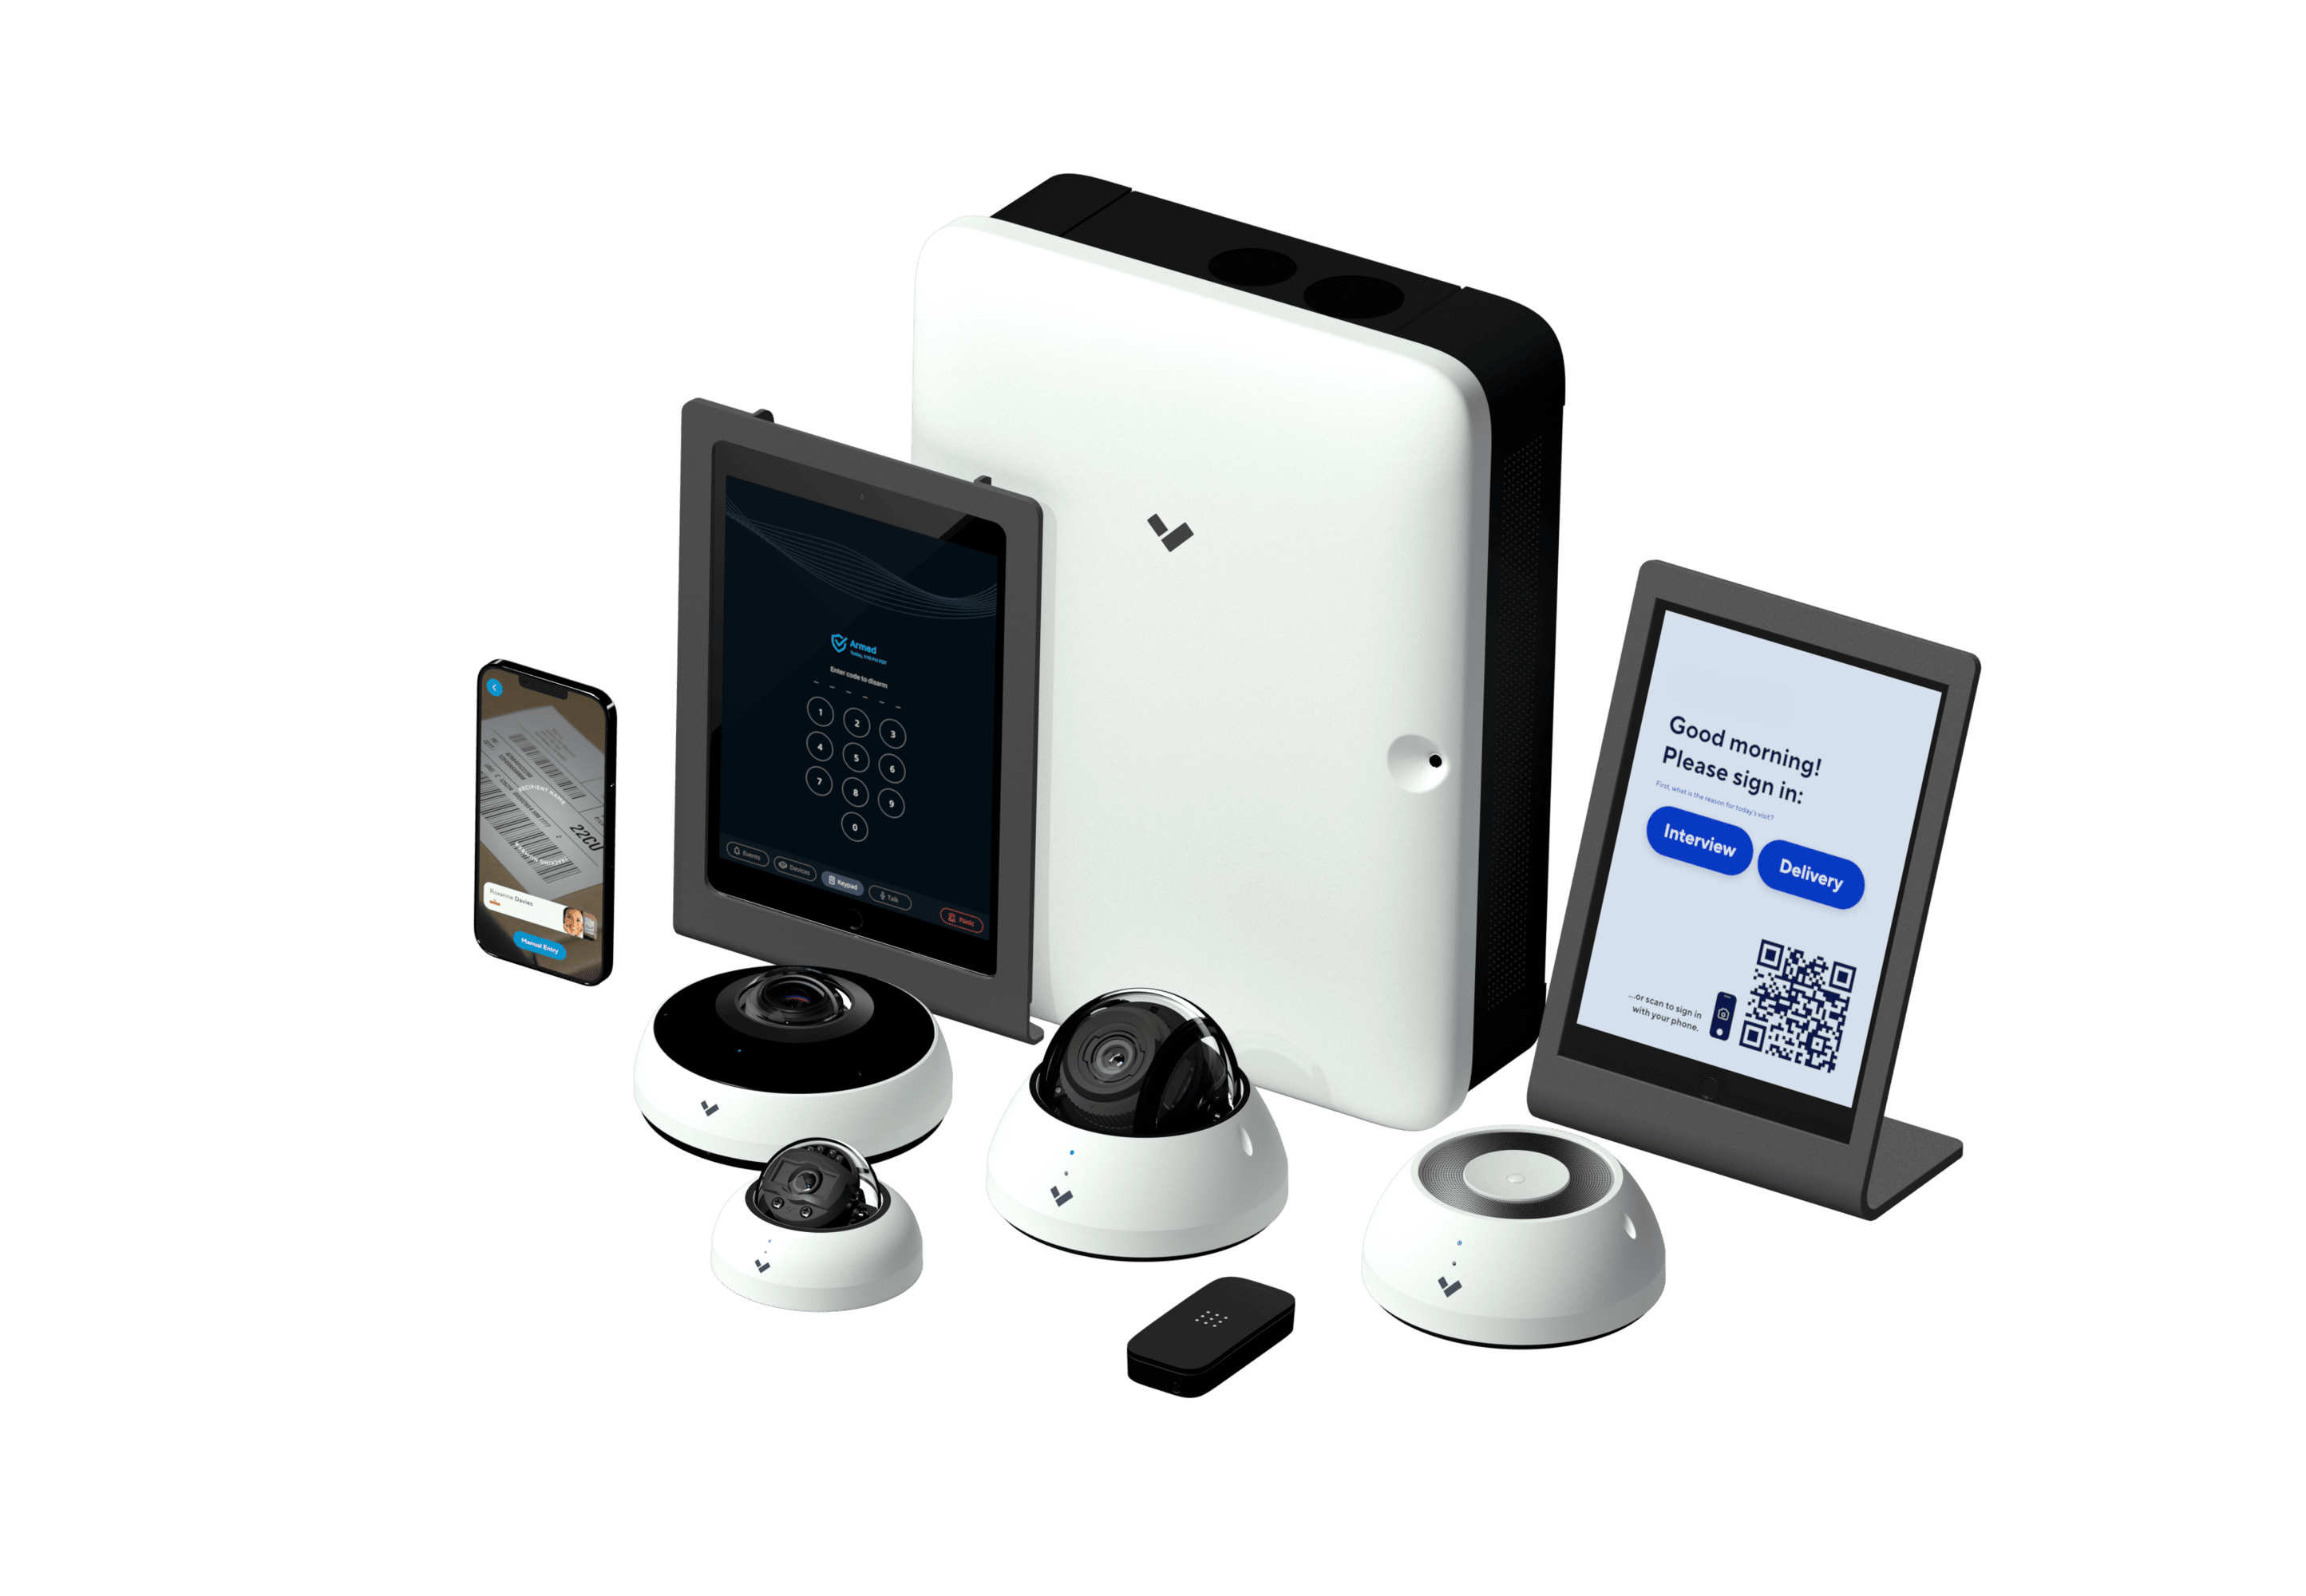 Verkada Device family used for diverse security needs